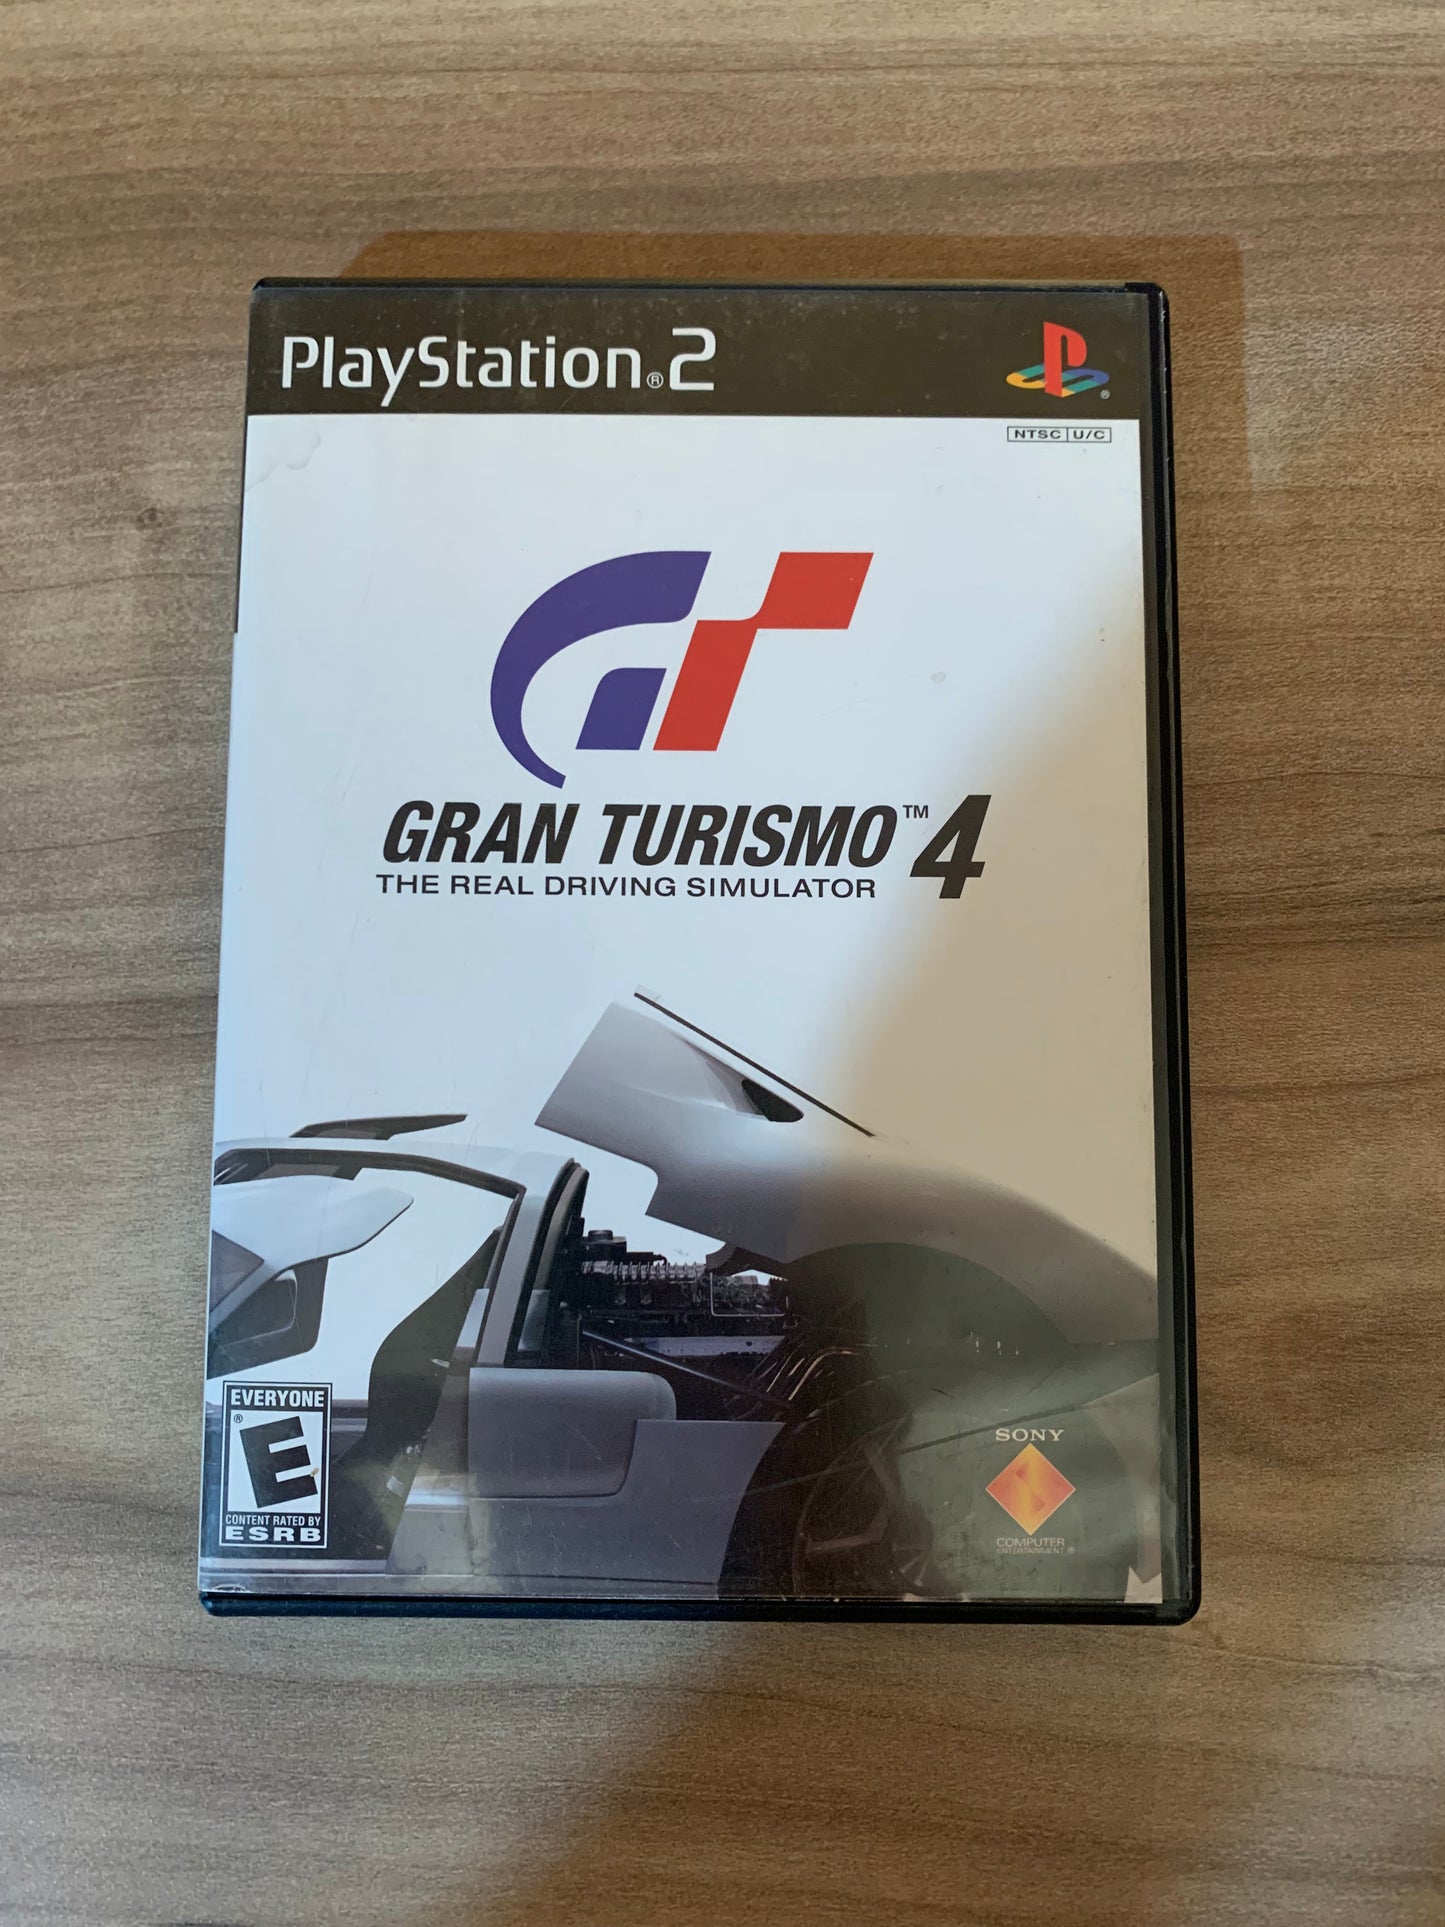 SONY PLAYSTATiON 2 [PS2] | GRAN TURiSMO 4 GT4 THE REAL DRiViNG SIMULATOR